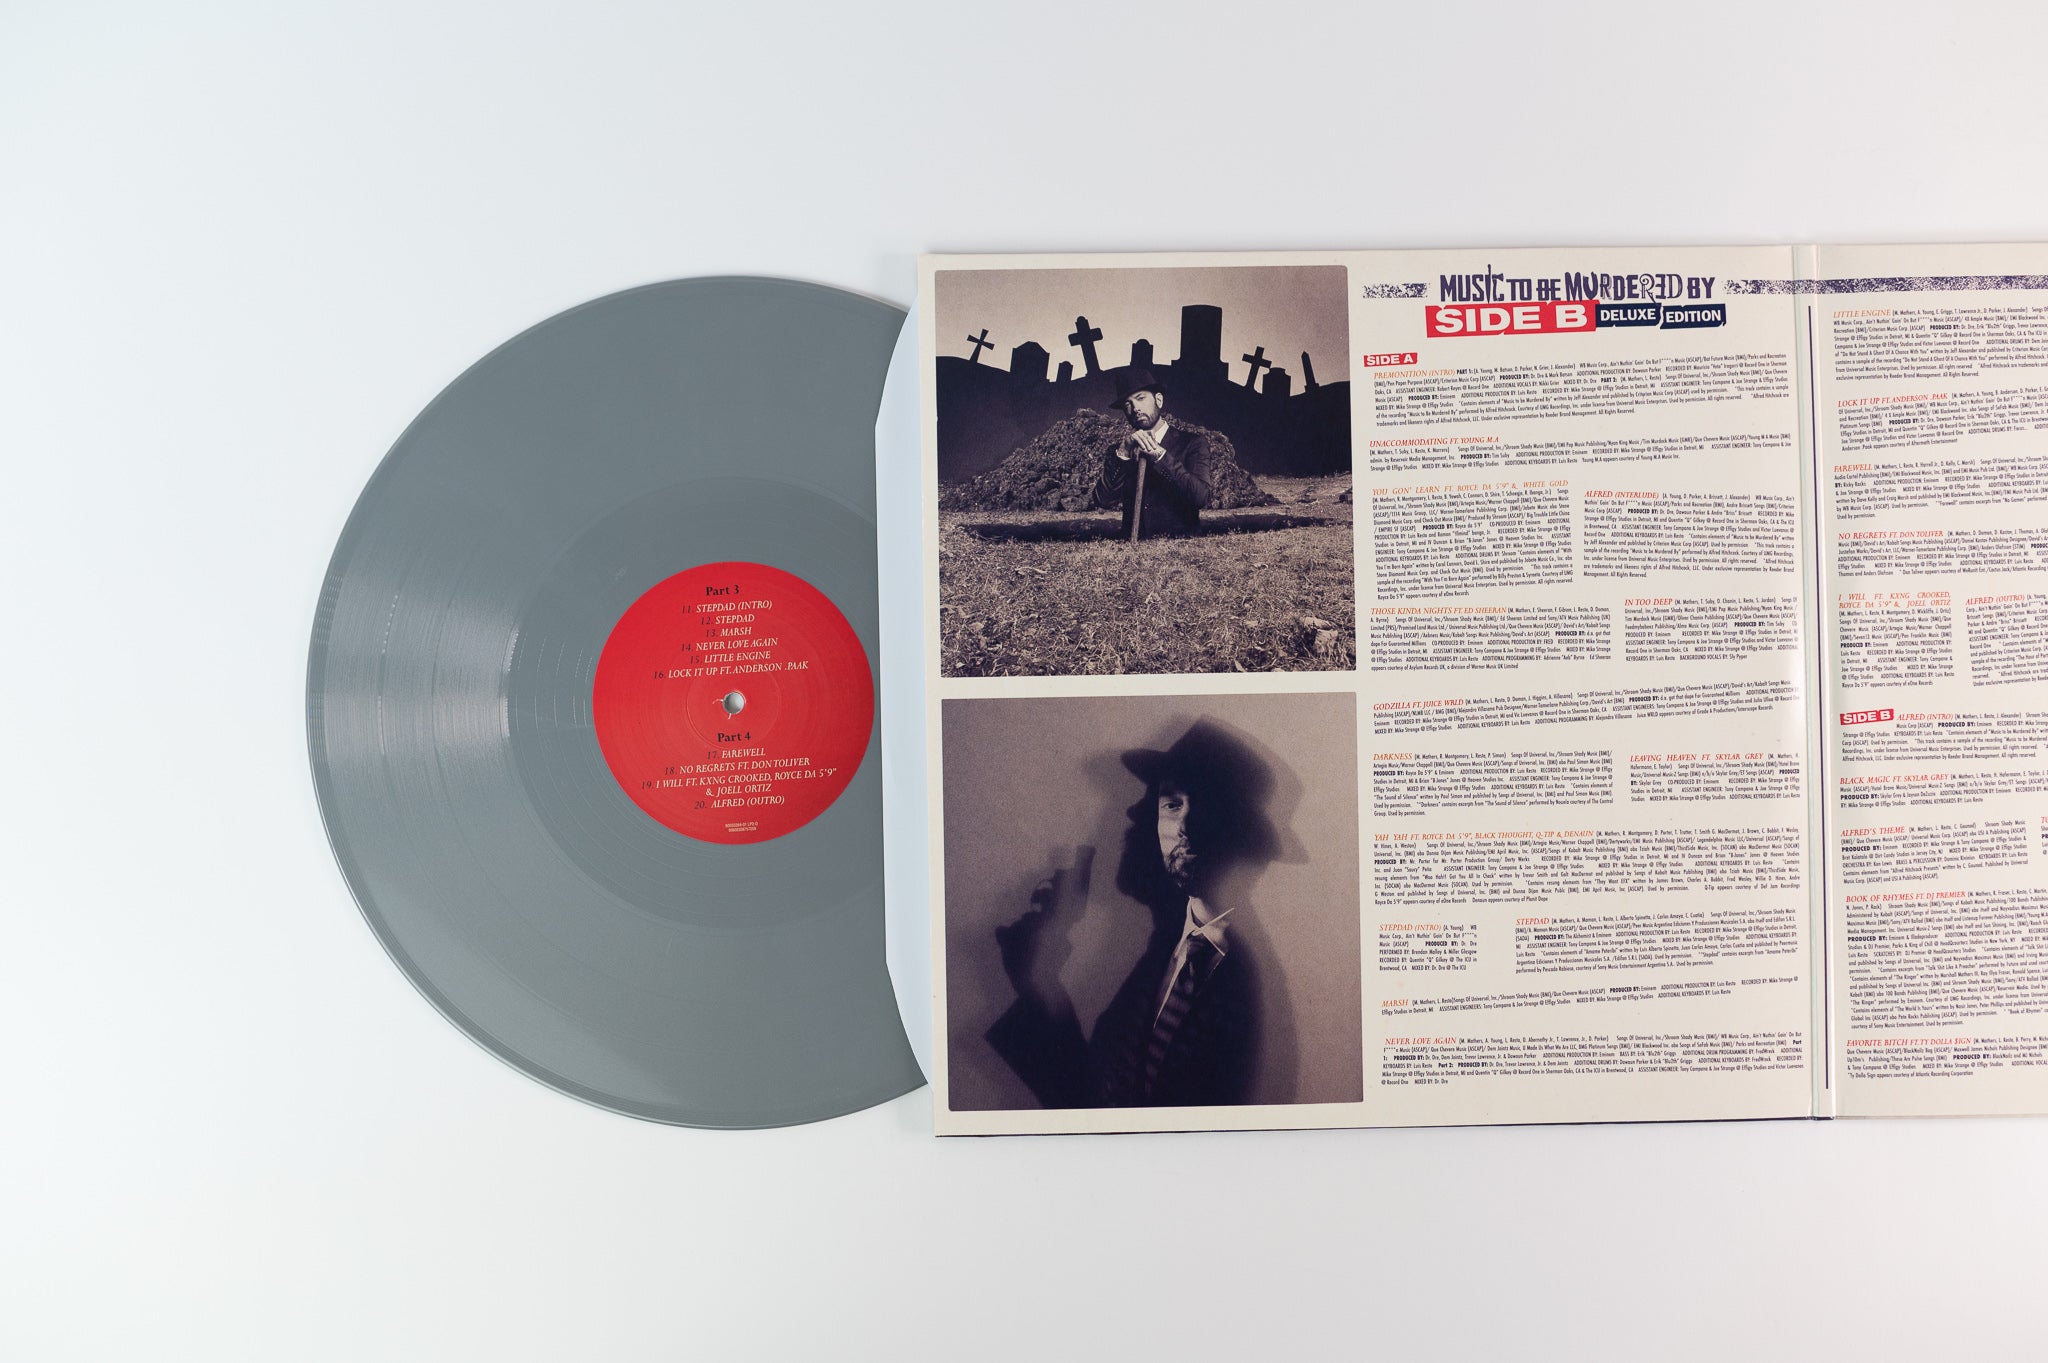 Eminem - Music To Be Murdered By (Side B) on Aftermath Shady Limited Grey Vinyl Reissue